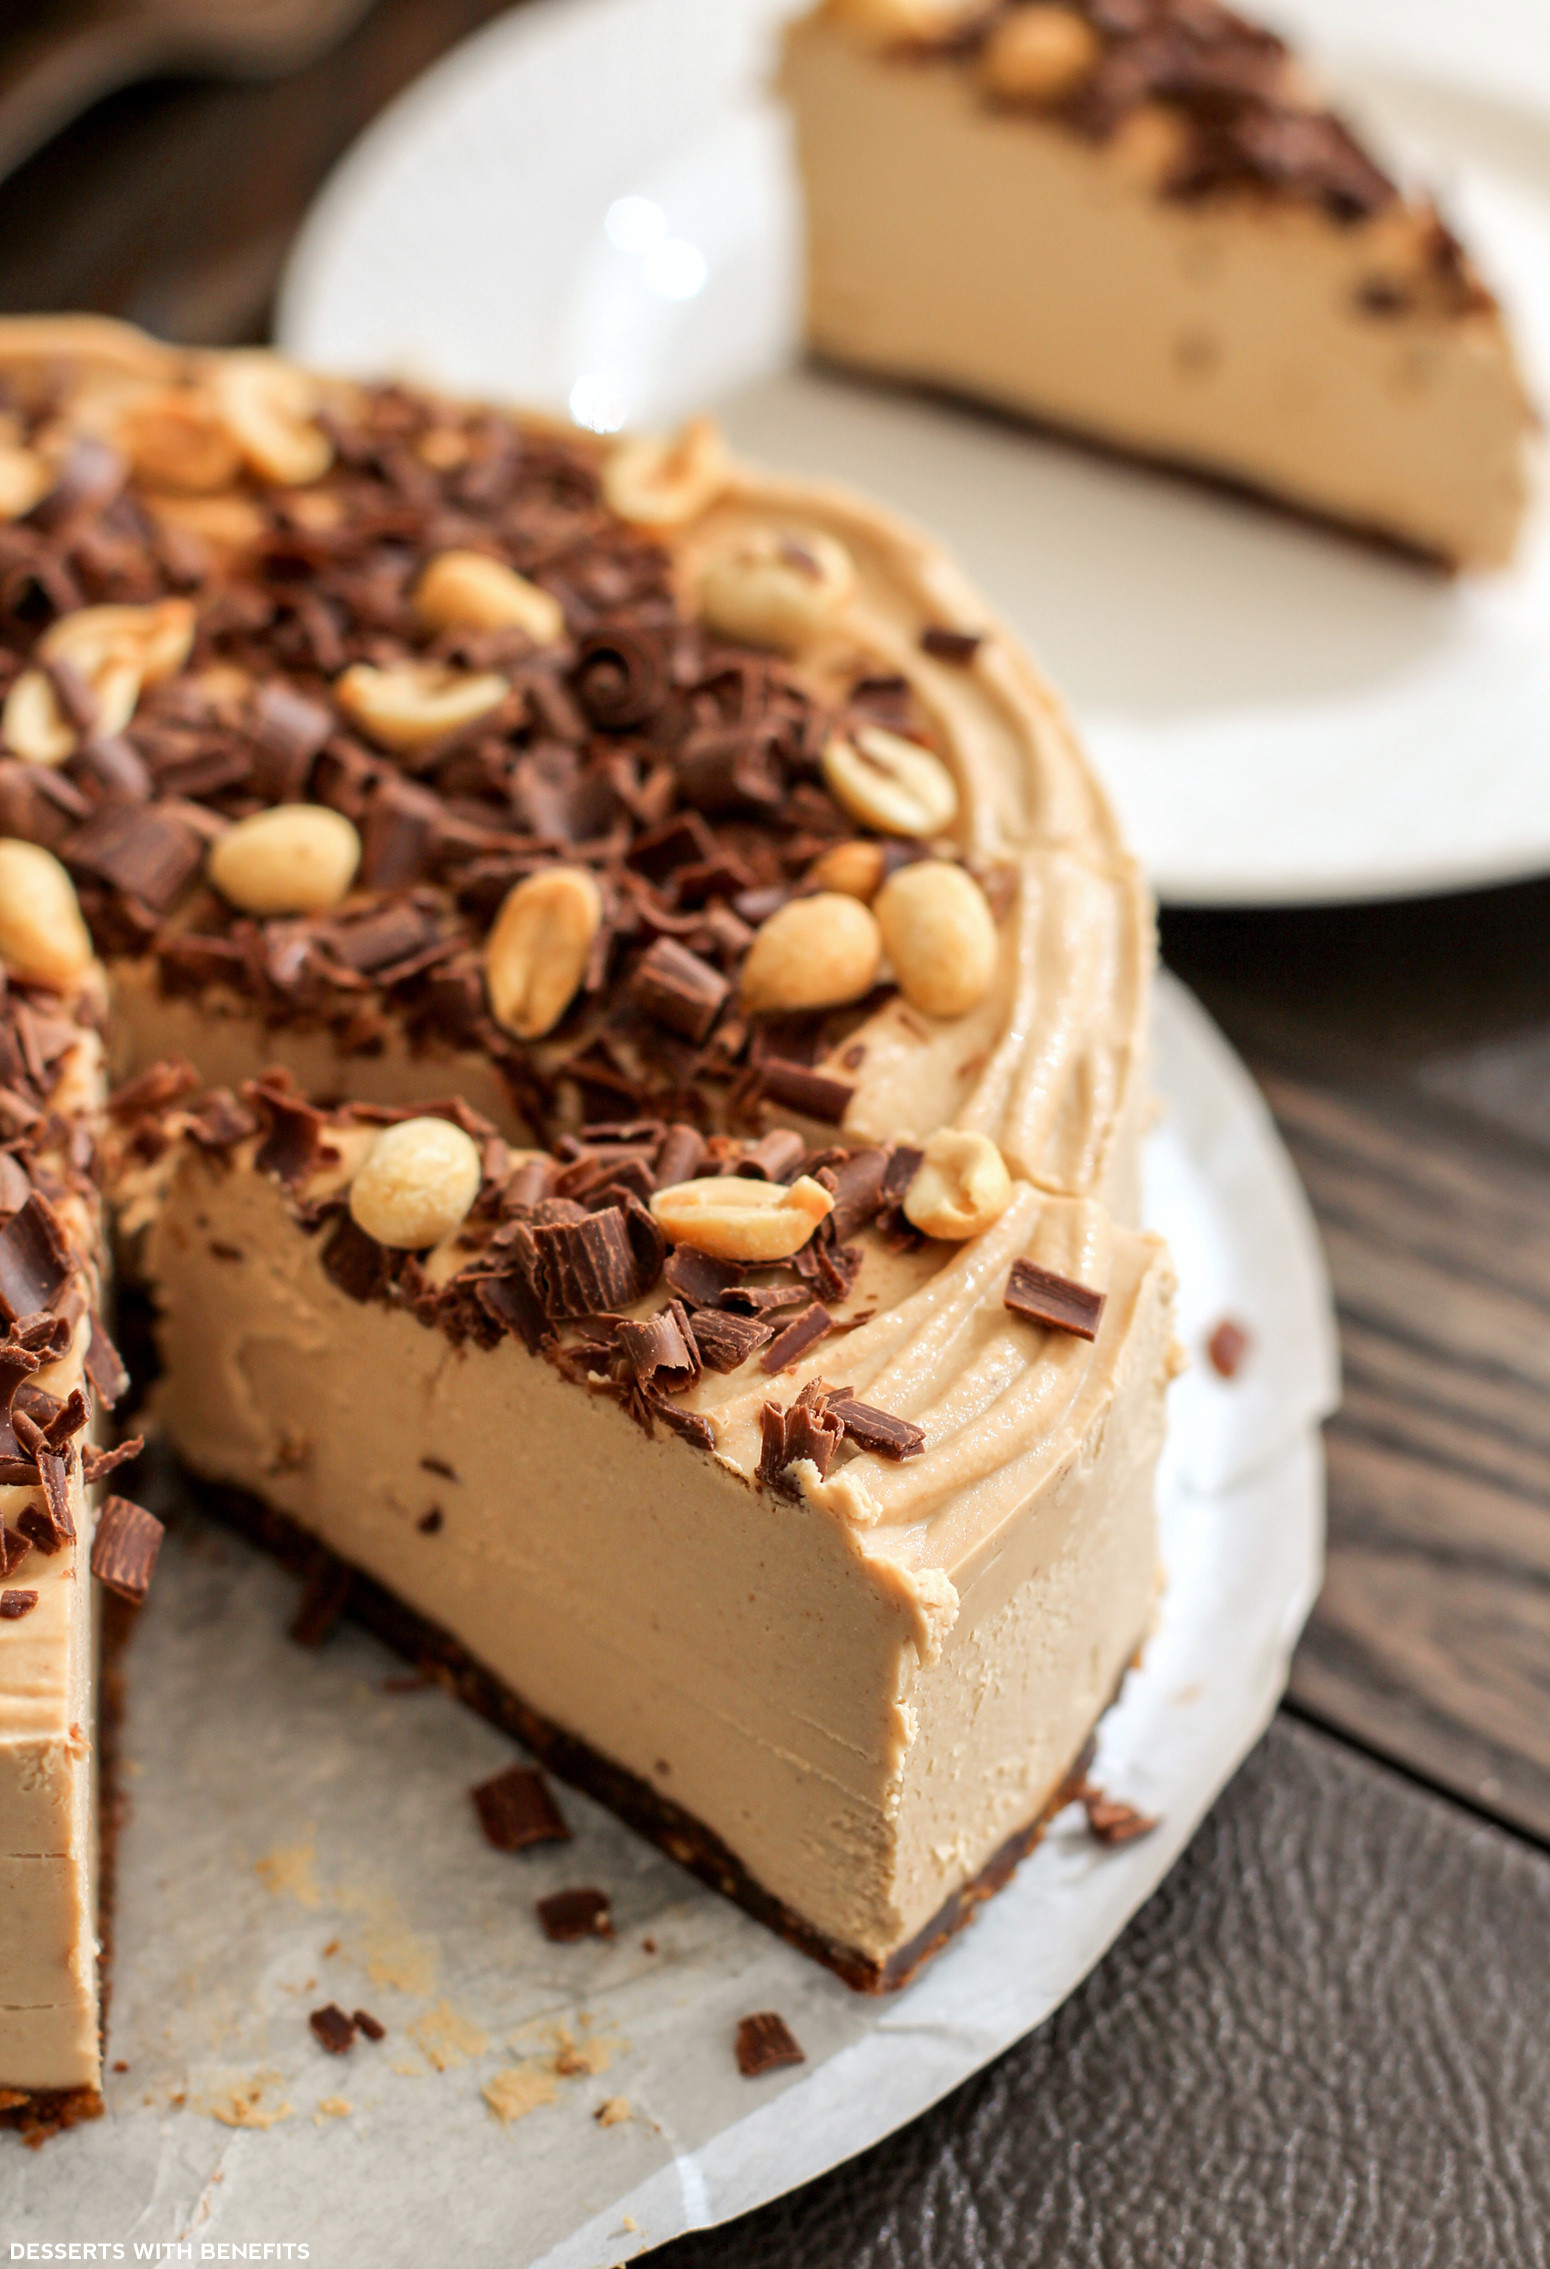 Healthy Peanut Butter Dessert Recipes
 Healthy Chocolate Peanut Butter Raw Cheesecake